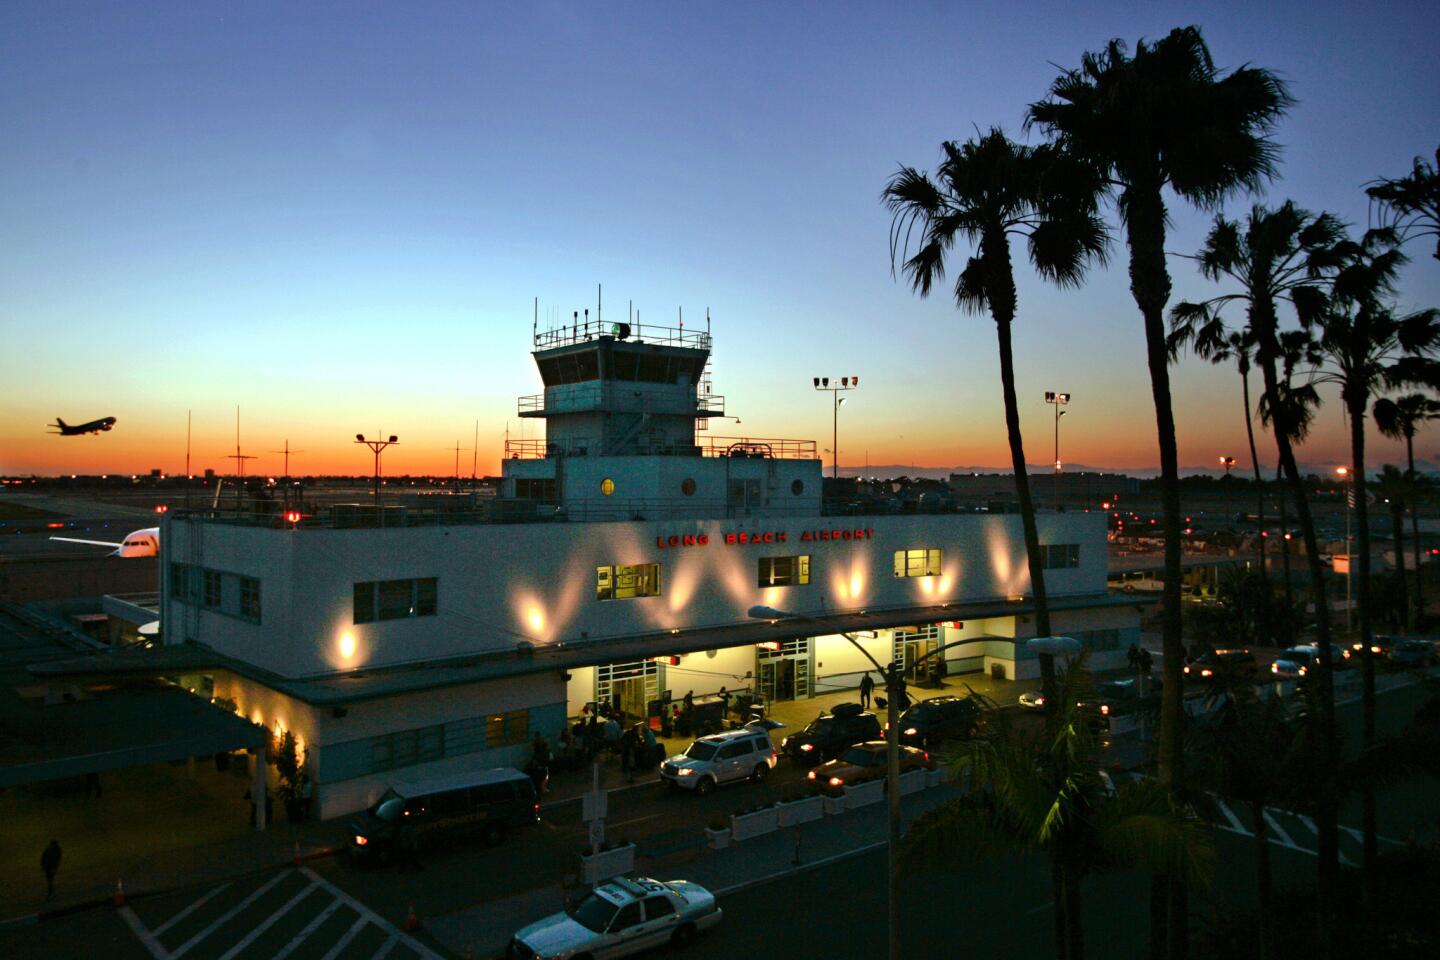 The Long Beach Airport's historic Art Deco terminal in 2010, before the new terminal and other modern touches were added on.